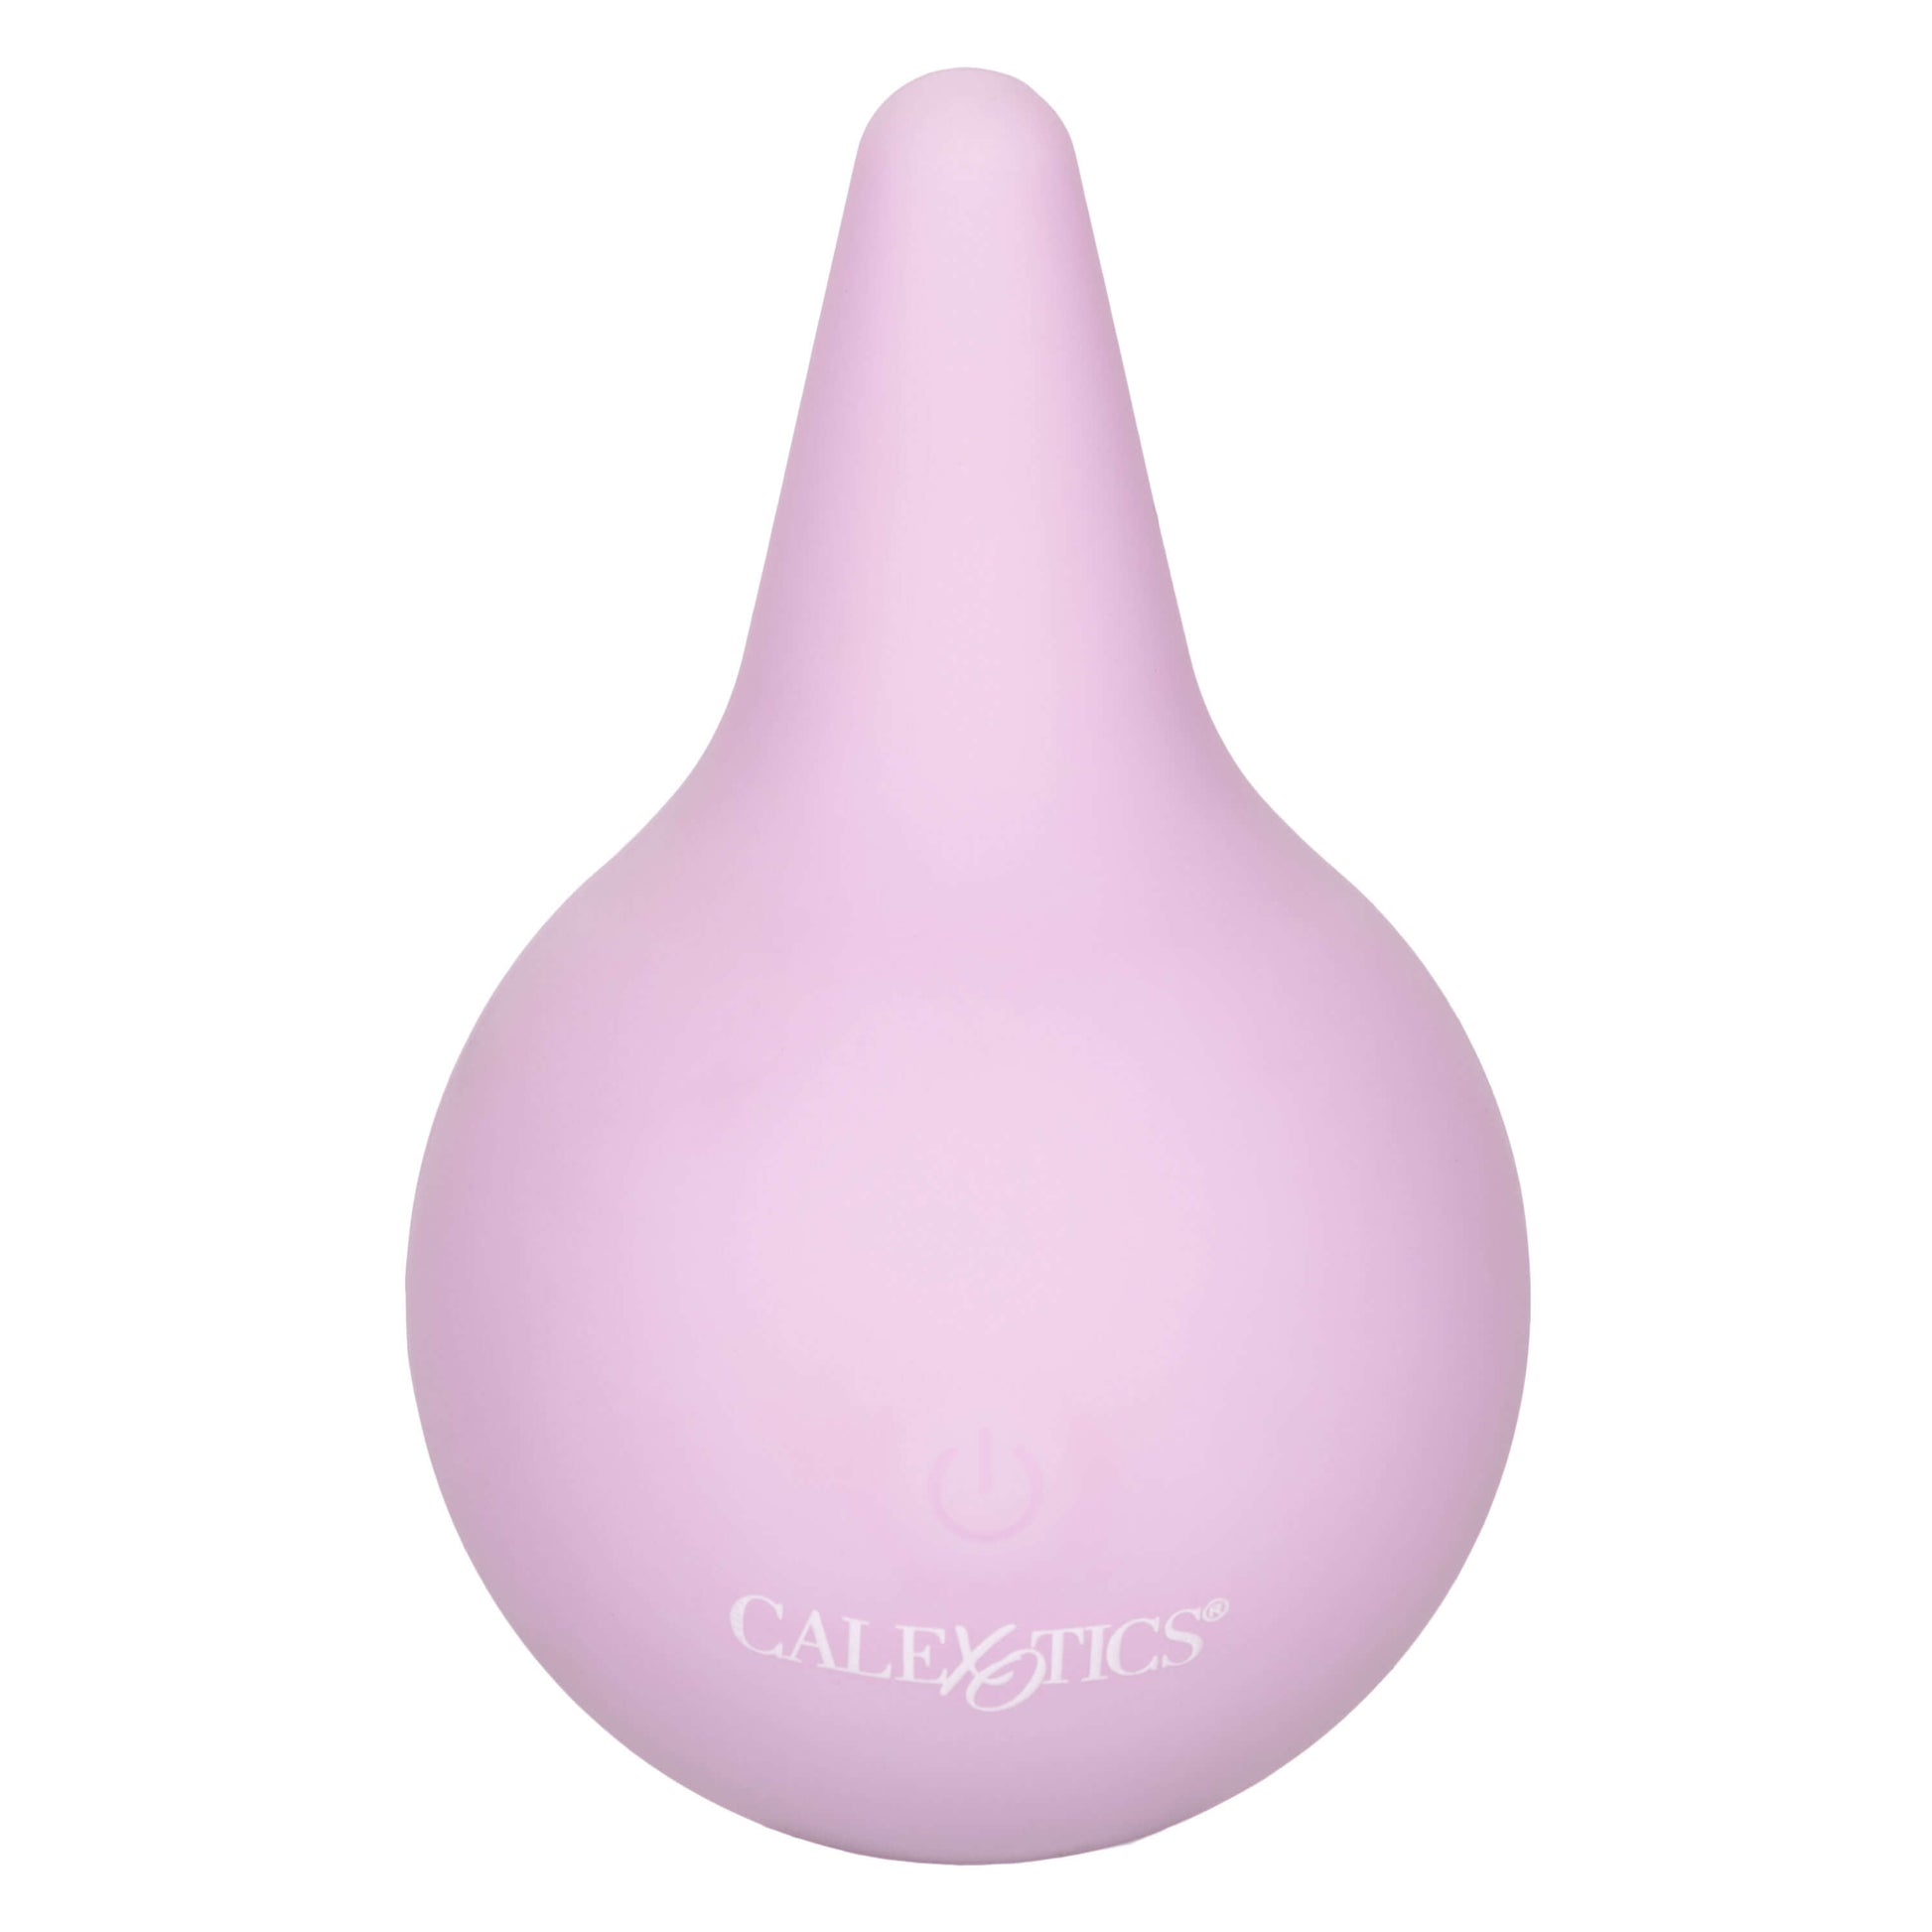 Slay #Arouse Me Vibrator - CalExotics - by The Bigger O  - an online sex toy shop. We ship to USA, Canada and the UK.